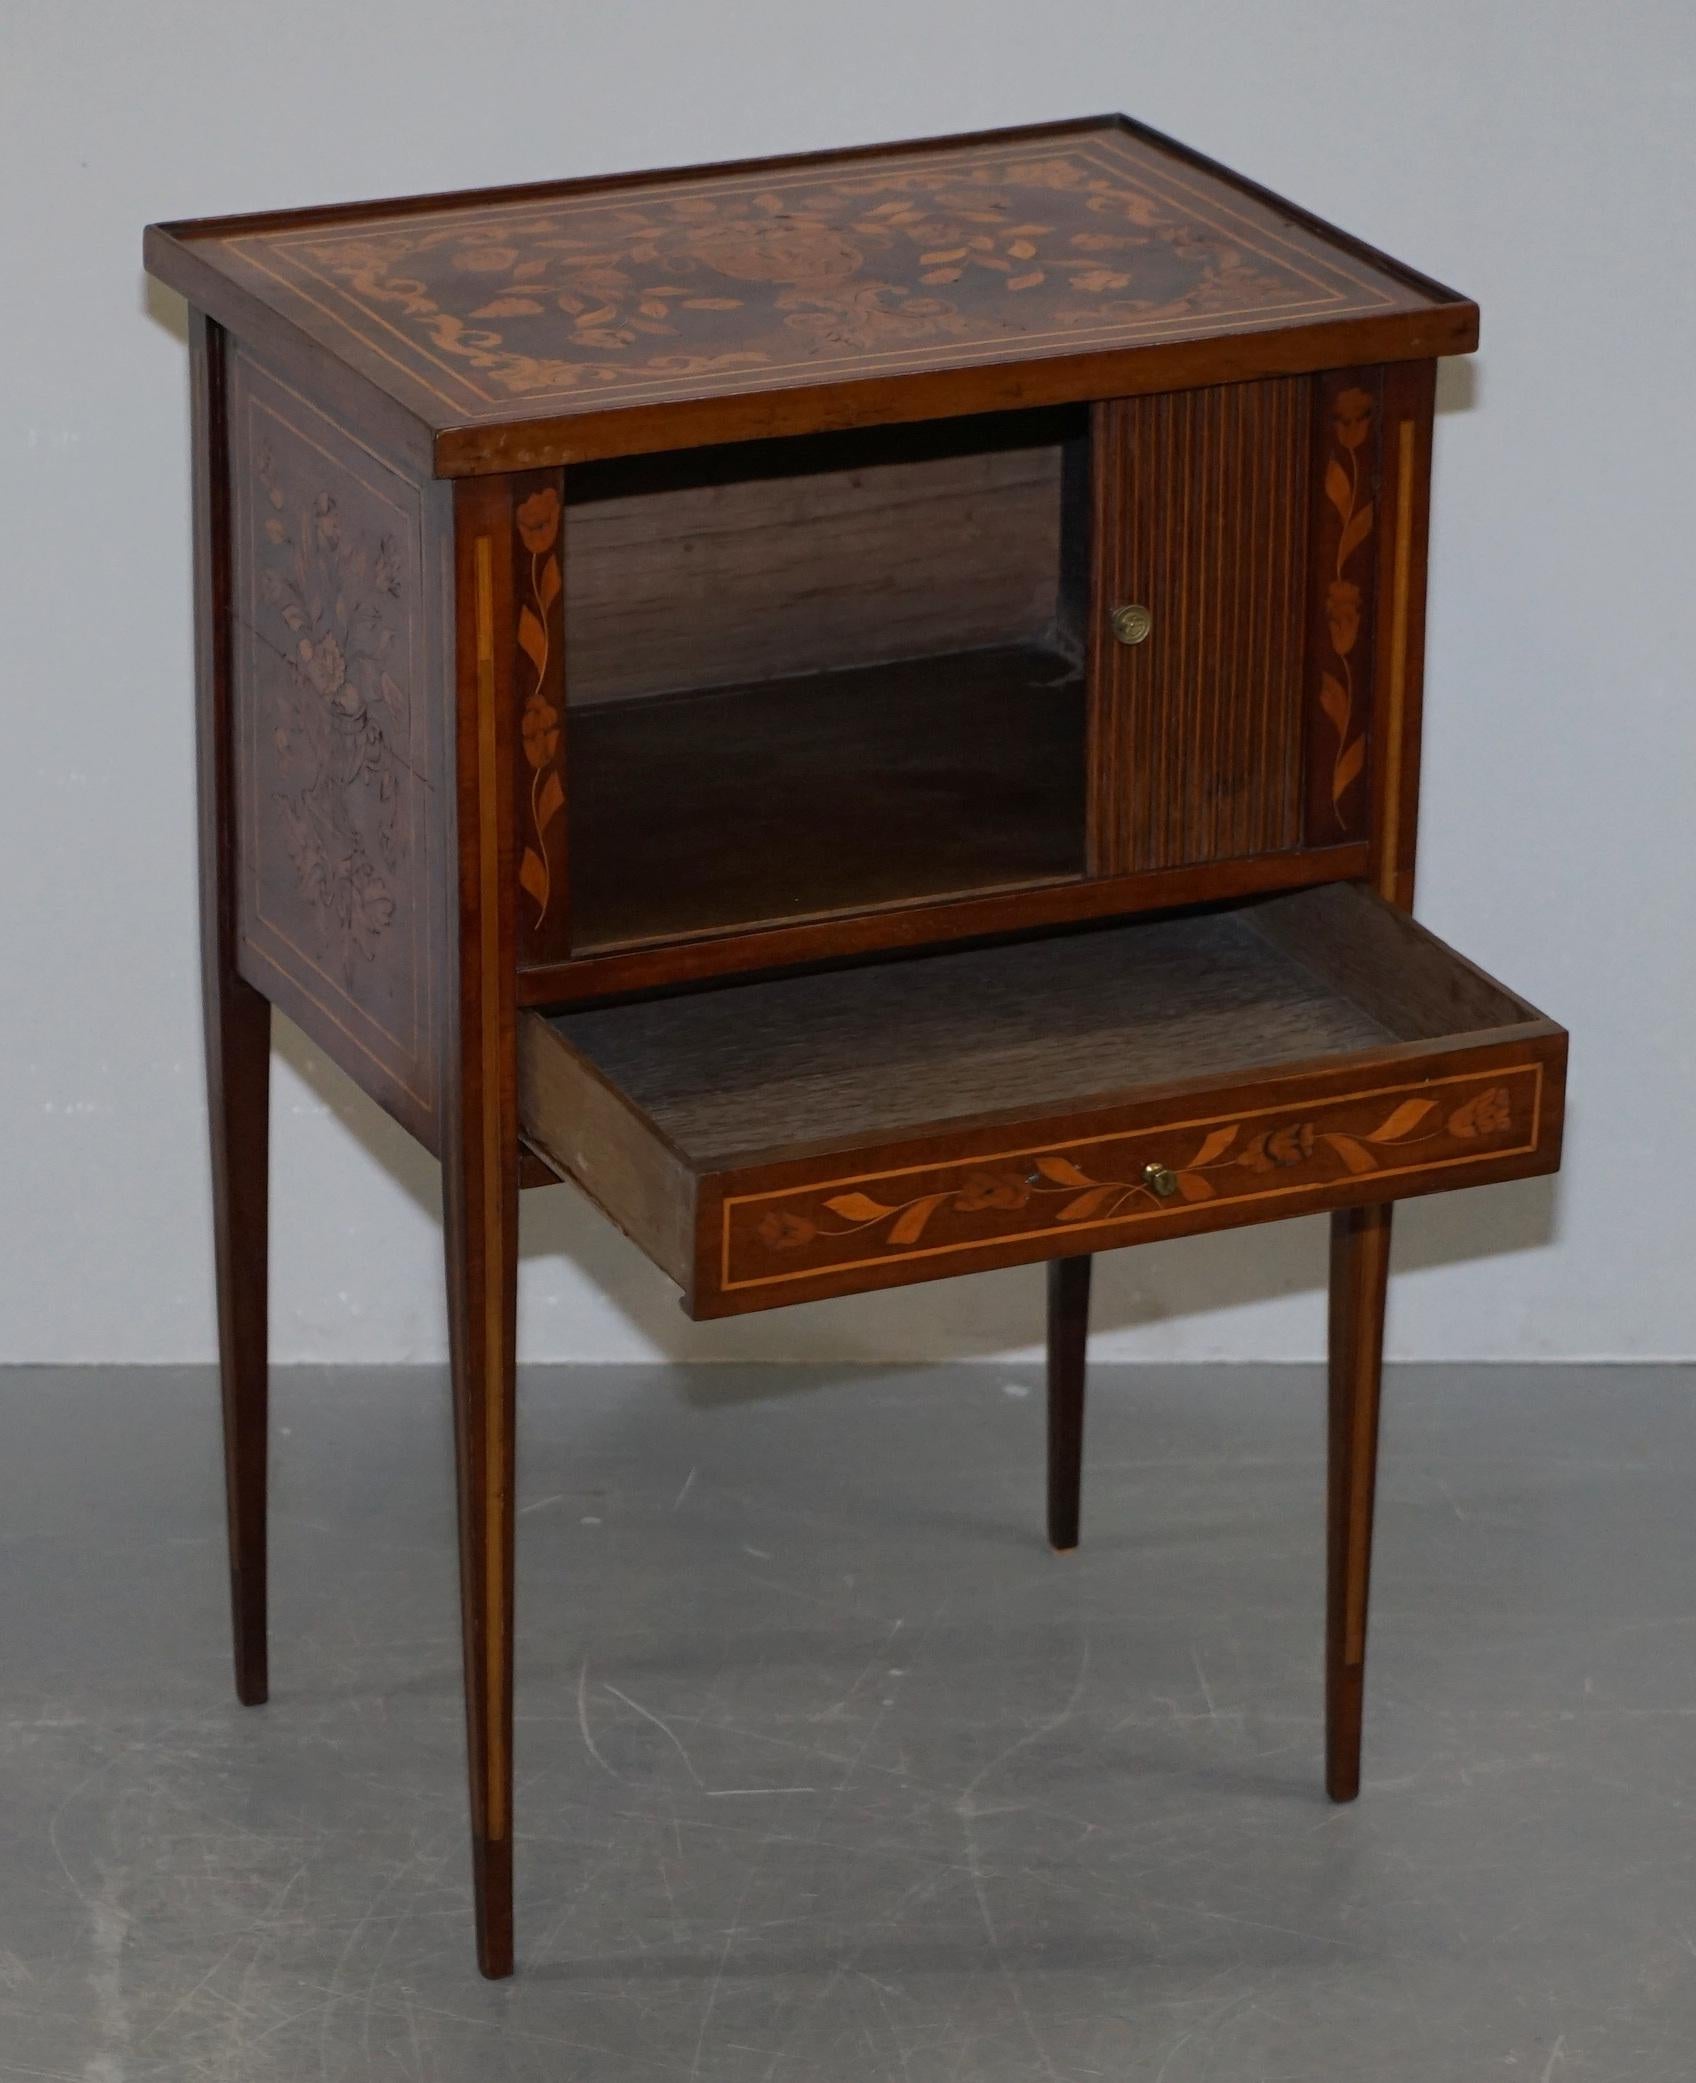 Rare 19th Century Dutch Marquetry Inlaid Side Table with Tambour Fronted Door For Sale 10